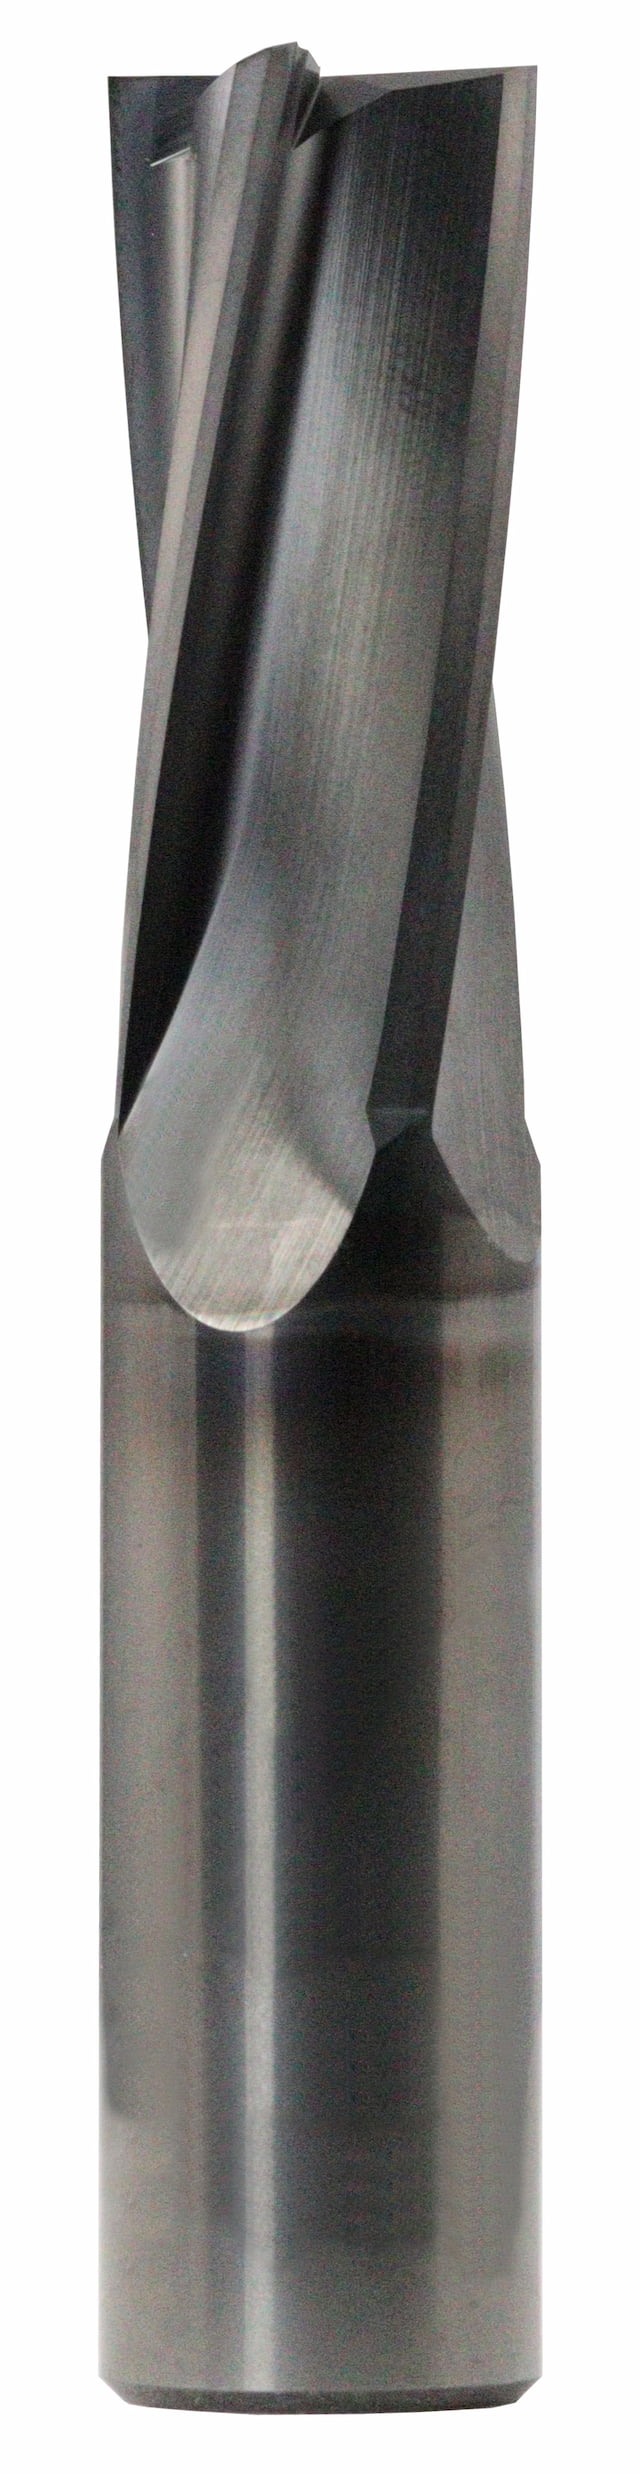 16.00mm Dia, 4 Flute, Square End End Mill - 83065